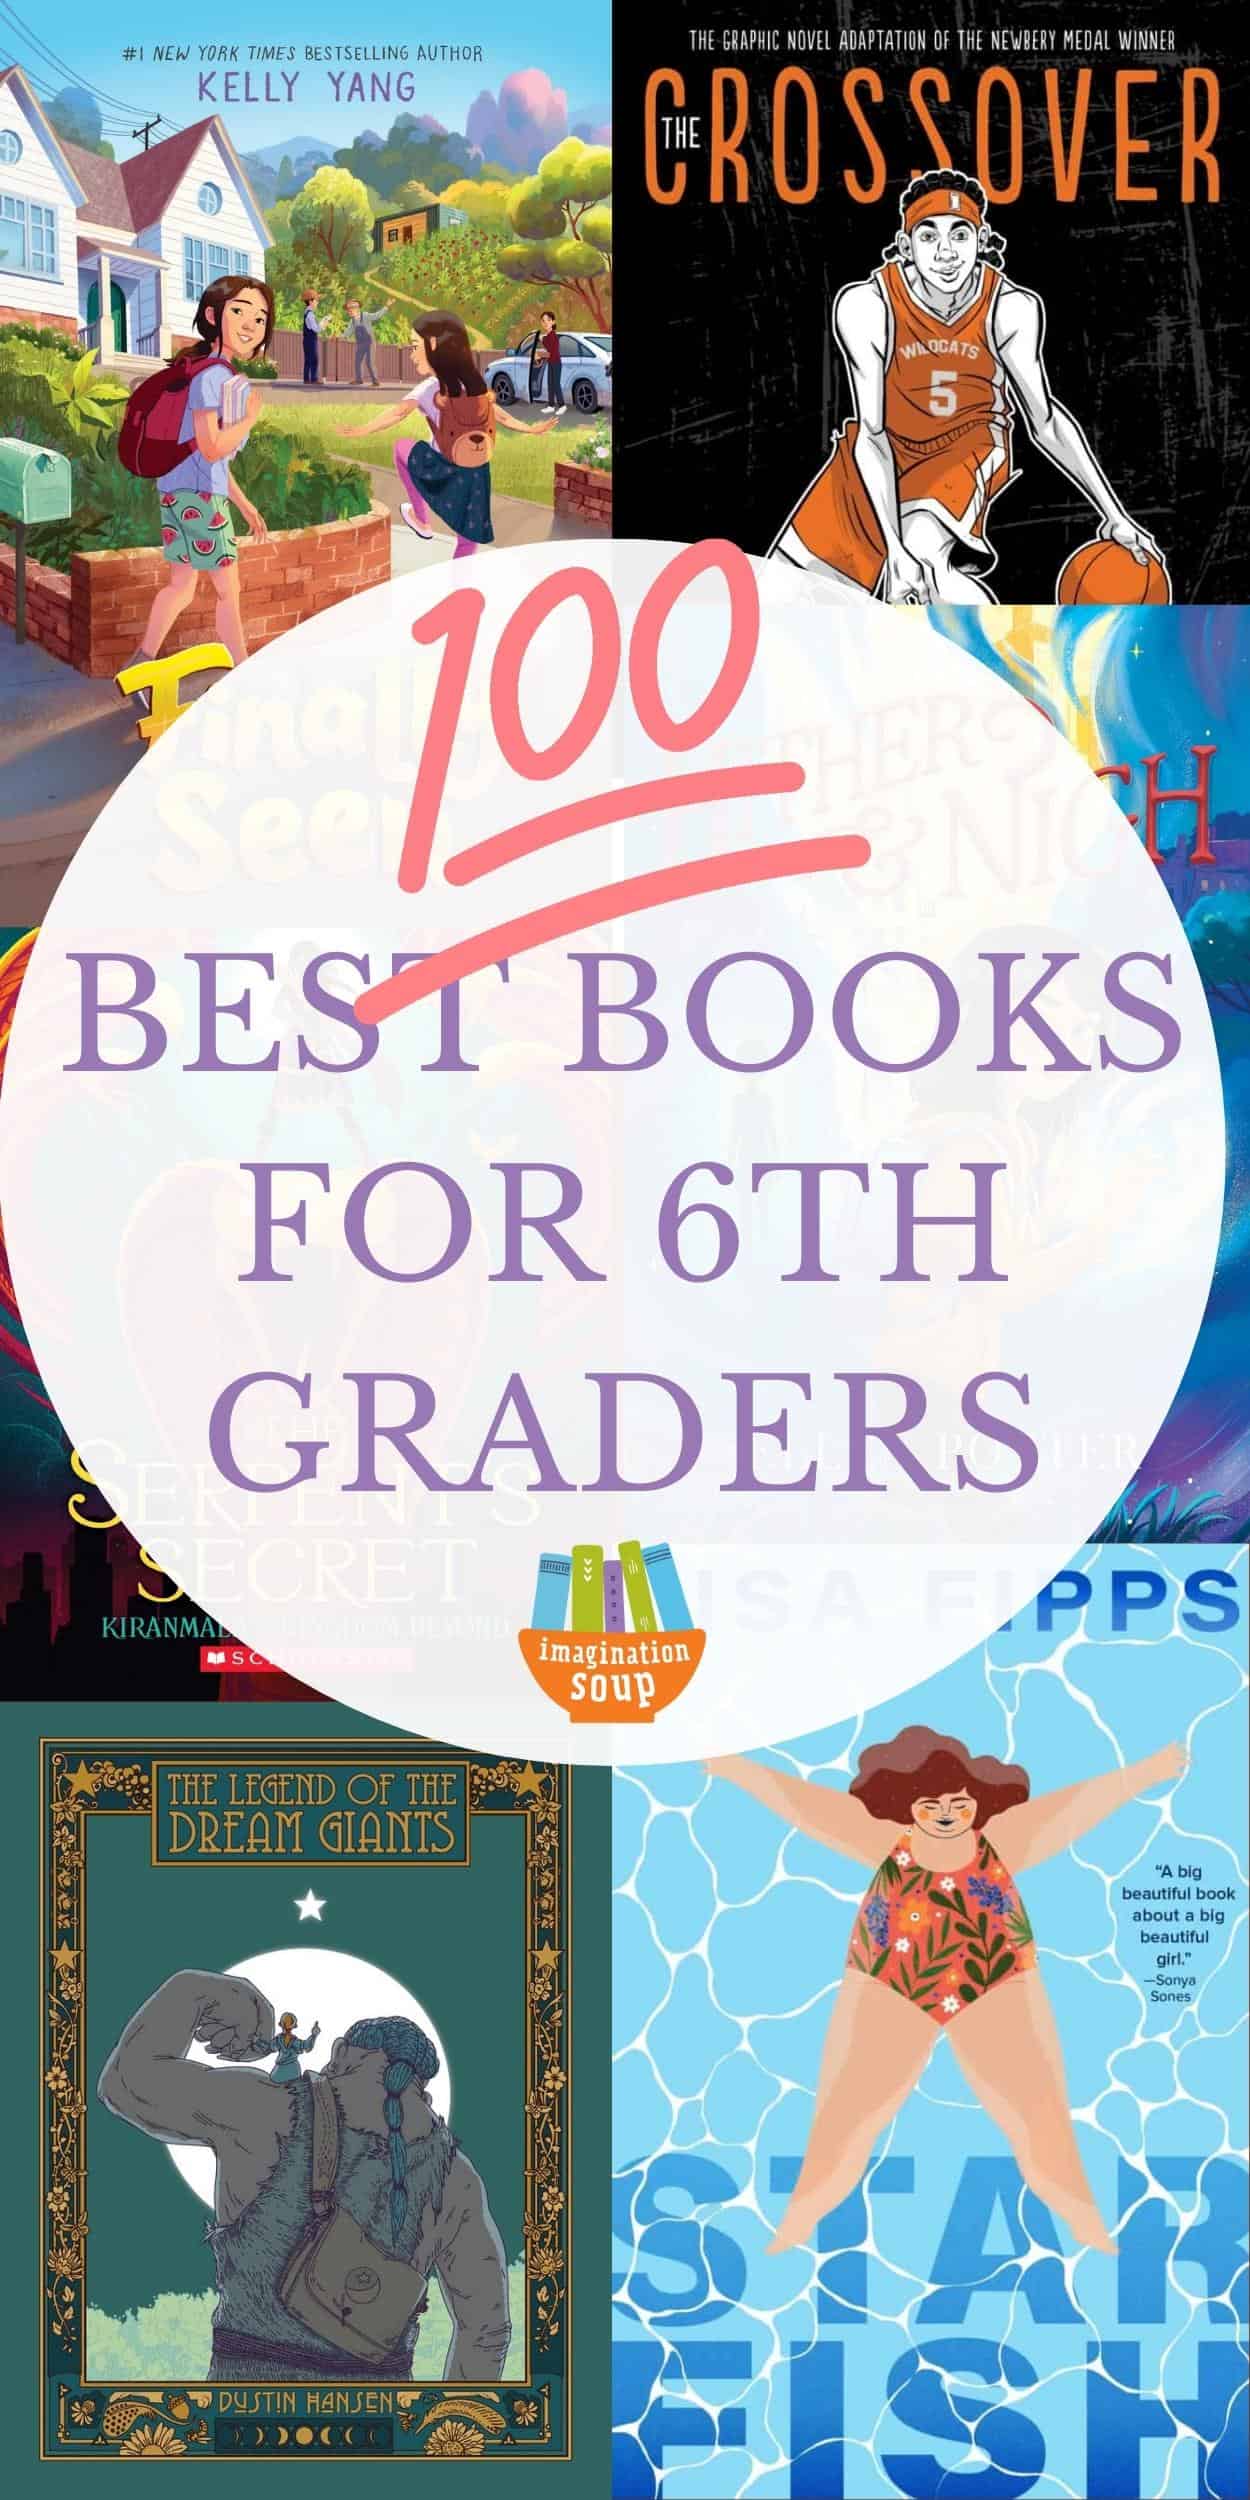 With so many good books for 6th graders, which are the best choices for your 11 and 12-year-olds in 6th grade? Don't worry, I got you covered. Below you'll find the BEST of the good middle grade books for sixth graders that are spot-on for maturity, reading level, and appeal.

Plus, each book review includes a genre tag, so look for the genre terms mystery, fantasy, realistic (also called contemporary), historical fiction, and science fiction to help you find the right book. It's always so helpful to match a child's interests with the books that they read. Not only that, I've bolded the sentence that summarizes the book so you can scan for other topics of interest. 